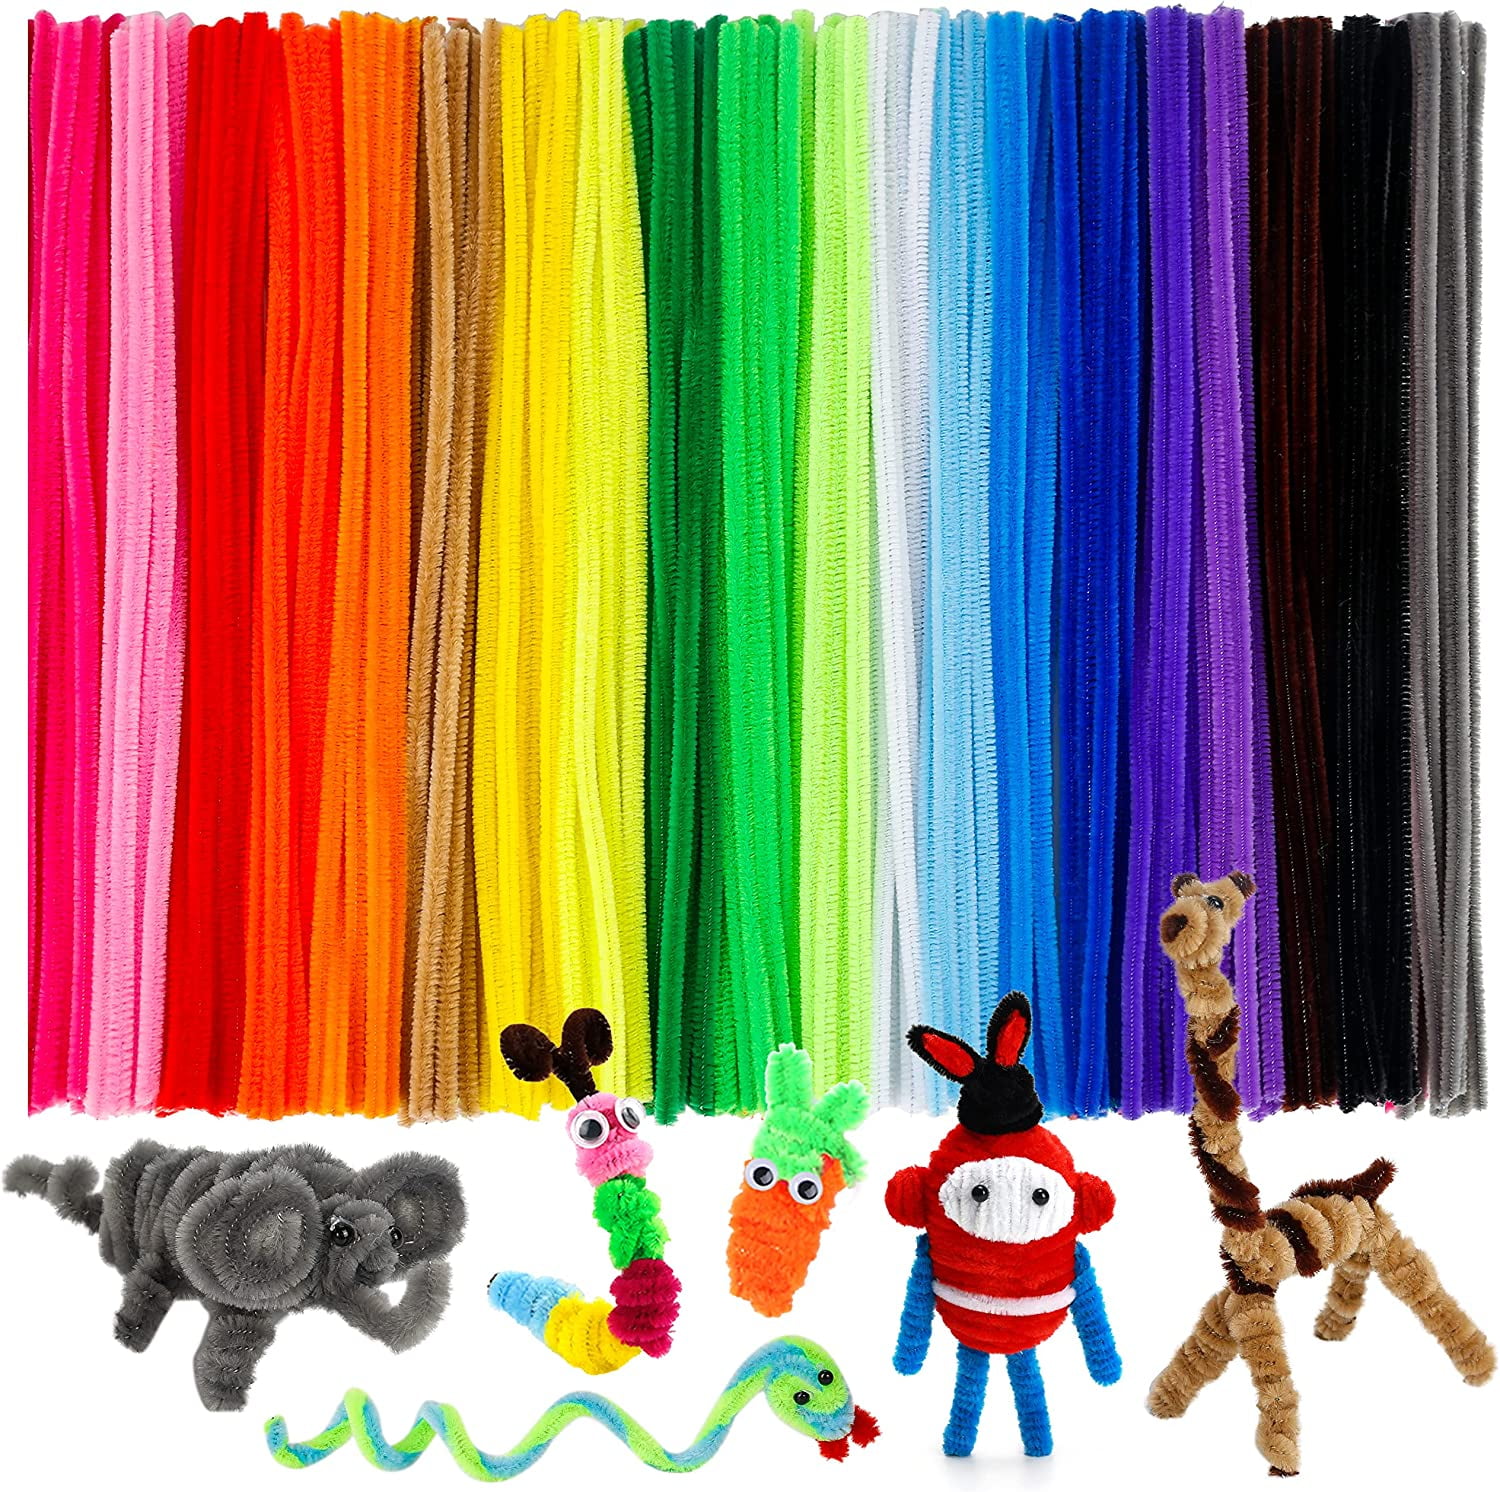 KRAFTMASTERS 200 PCS Pipe Cleaners Craft Supplies Multi-Color Stems for  Craft 12inch x 6mm - 200 PCS Pipe Cleaners Craft Supplies Multi-Color Stems  for Craft 12inch x 6mm . shop for KRAFTMASTERS